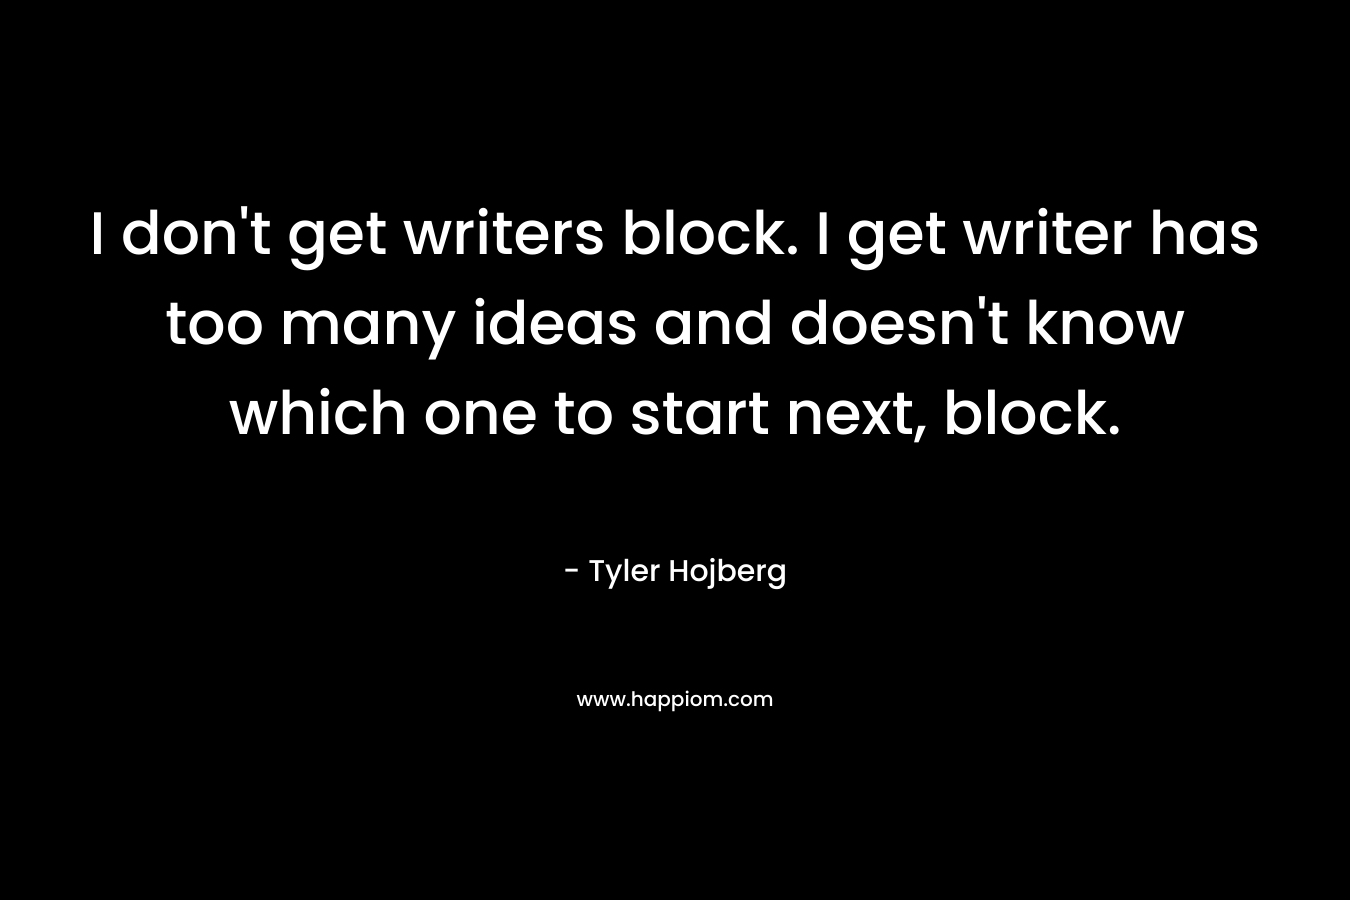 I don't get writers block. I get writer has too many ideas and doesn't know which one to start next, block.